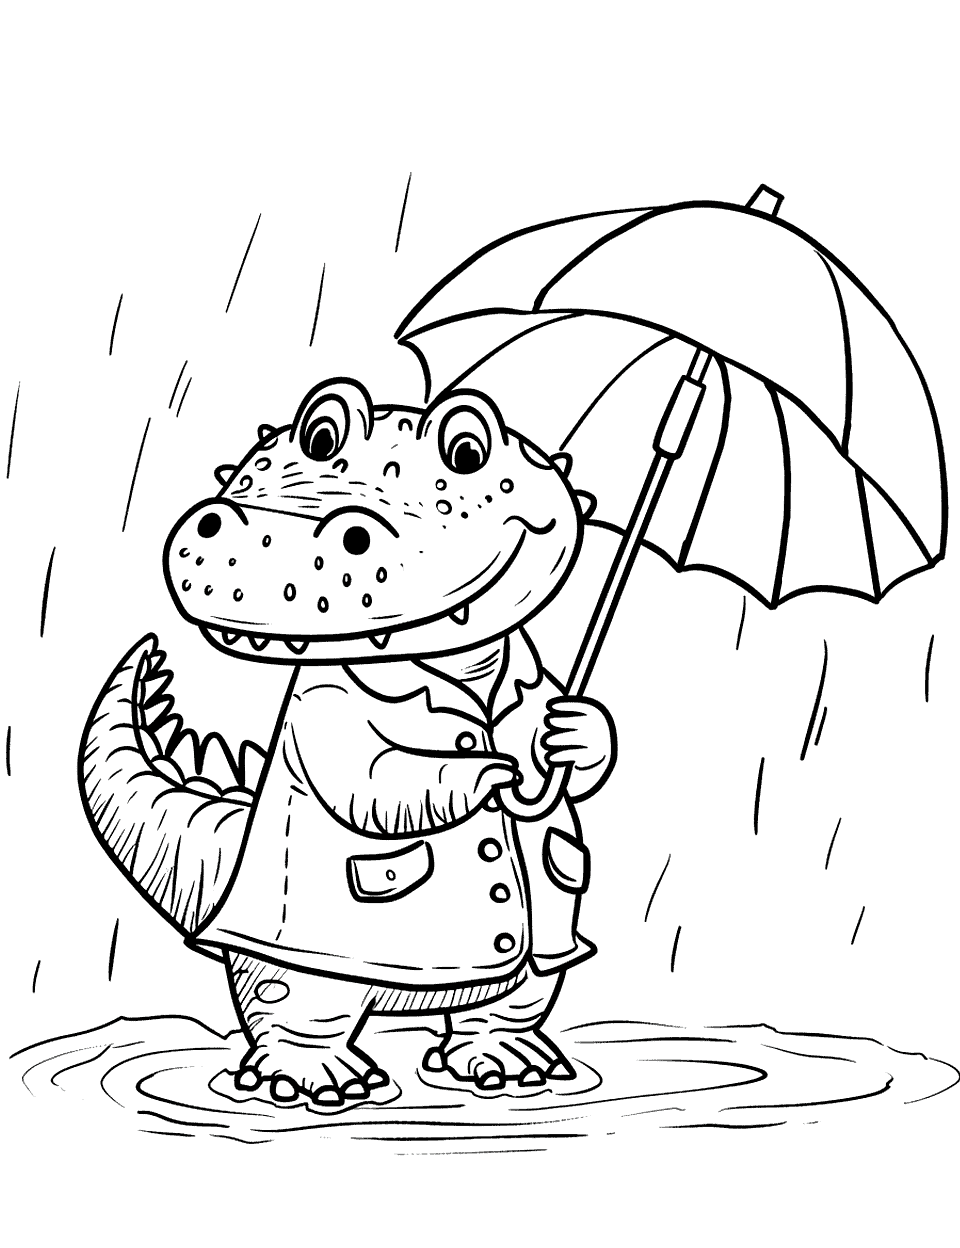 Alligator in a Raincoat Coloring Page - An alligator walking in the rain with a raincoat and an umbrella.